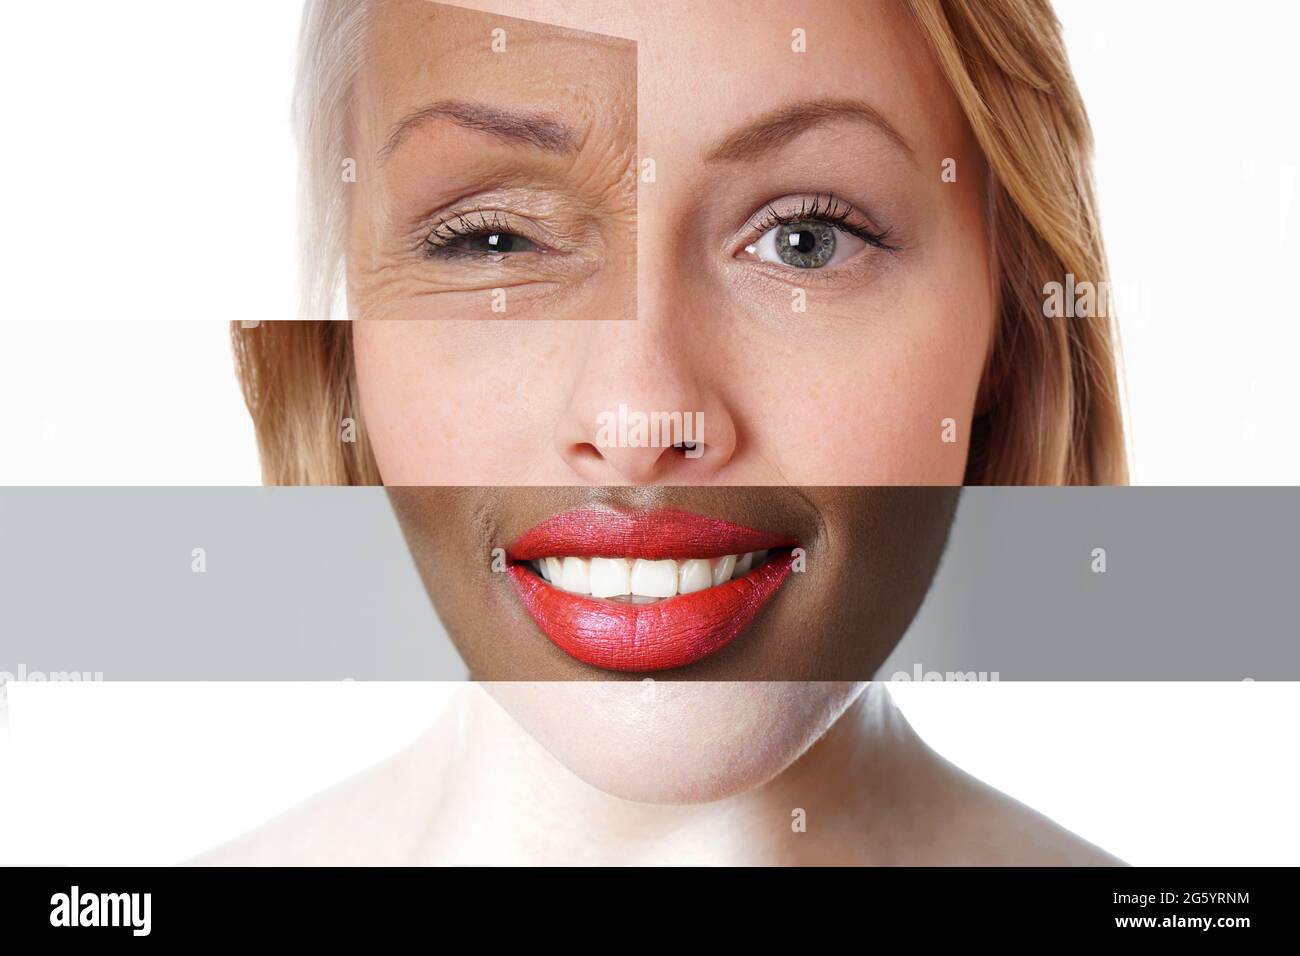 composite face made of multi-ethnic women of different ages Stock Photo